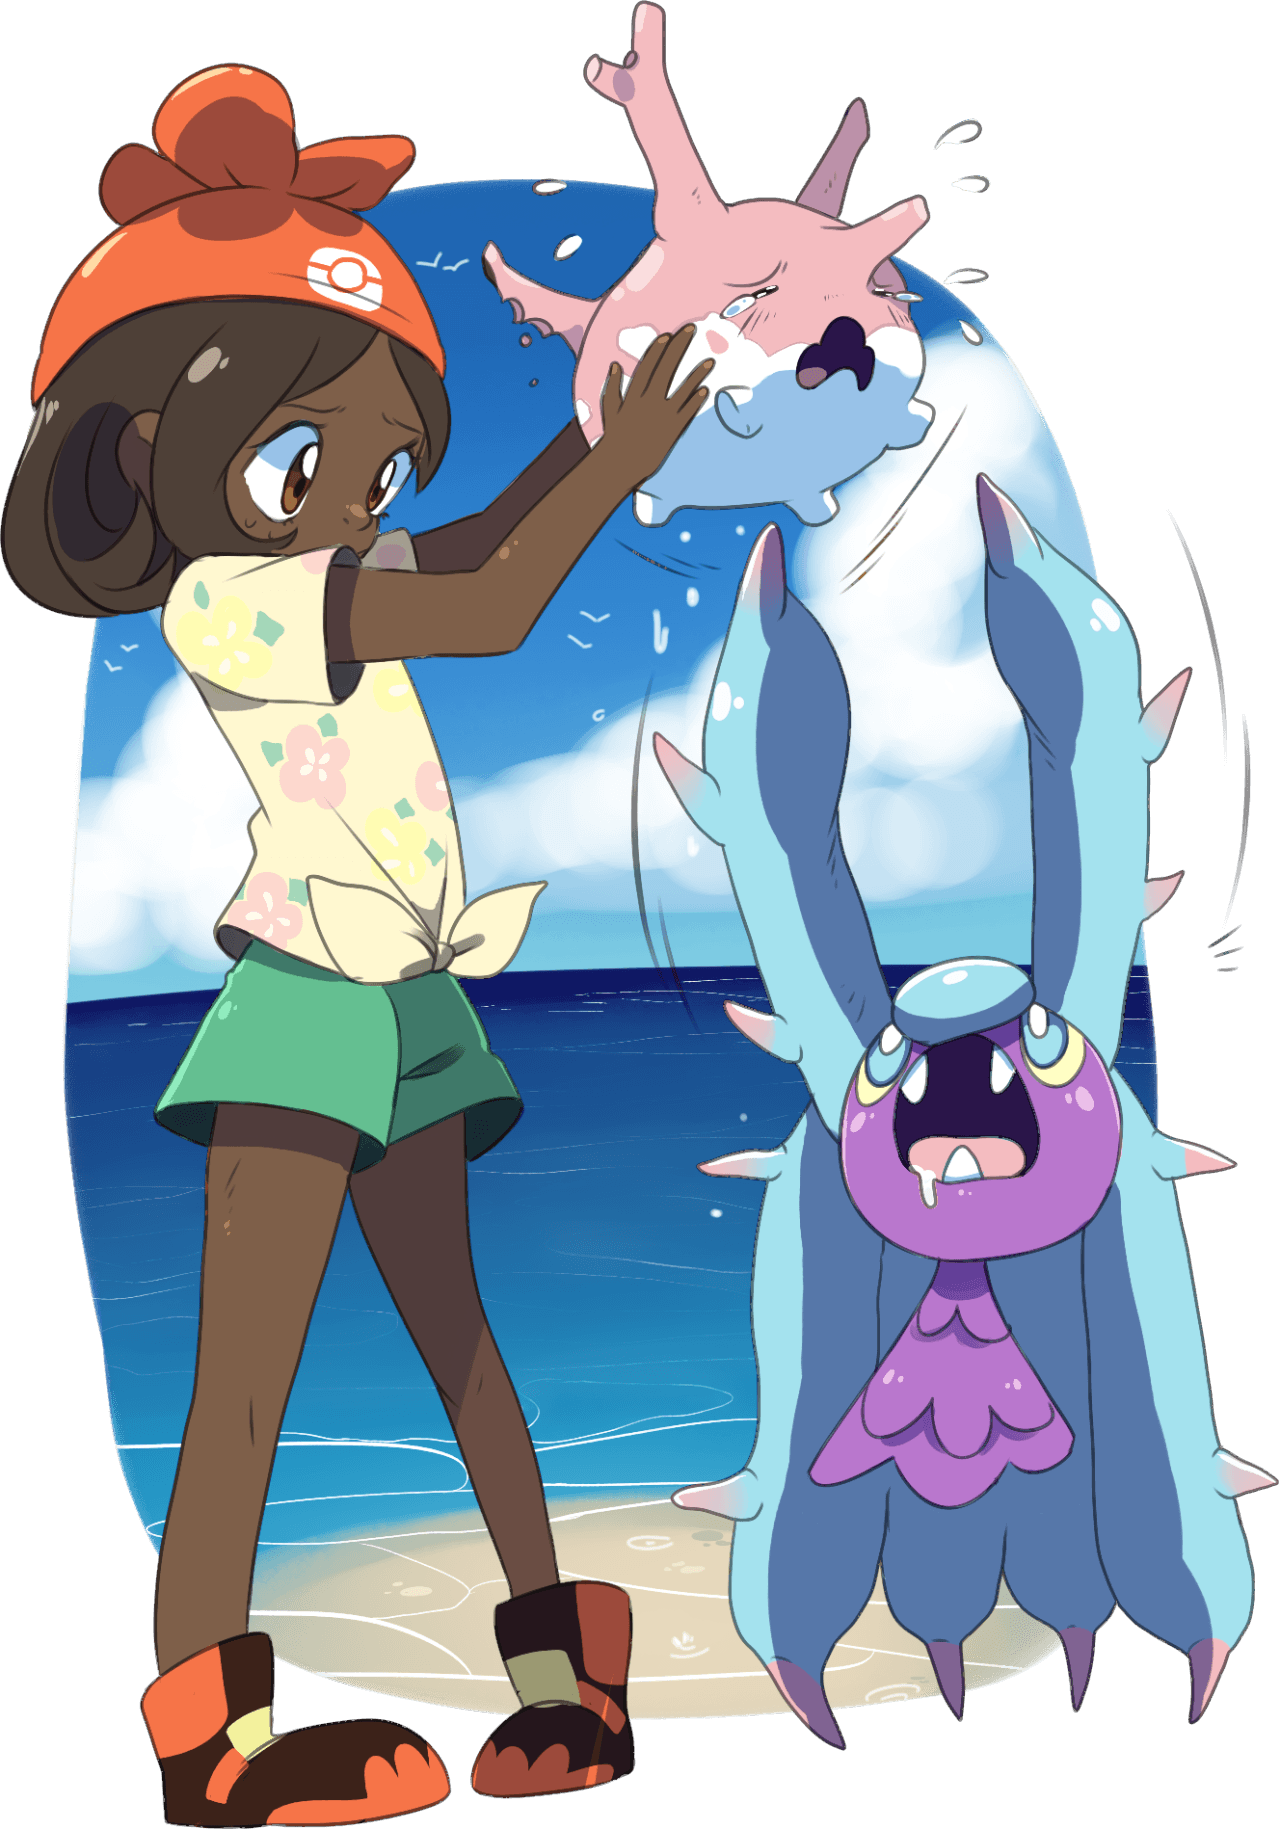 one last mareanie for the night time by ladiebug. Mareanie